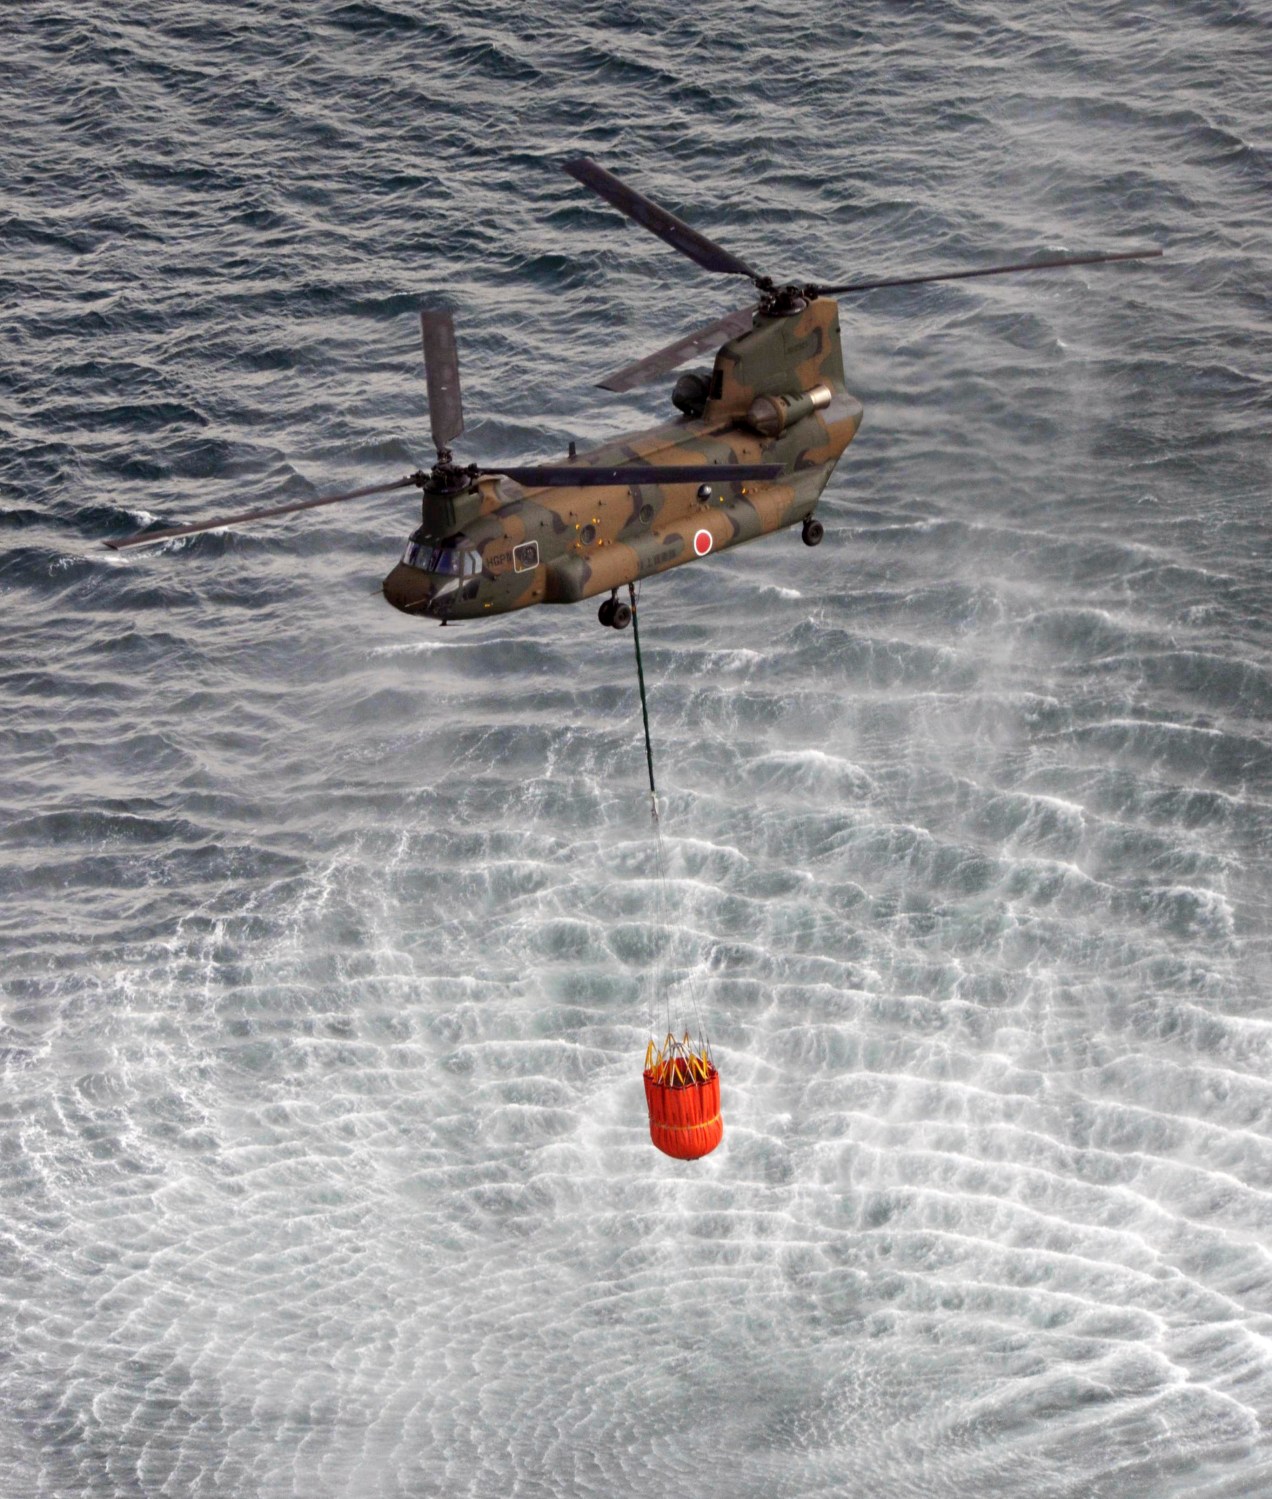 A Japan Air Self-Defense Force CH-47 Chinook helicopter collects water from the ocean to drop on the reactors at the Fukushima Daiichi nuclear plant in Fukushima March 17, 2011. Operators of the quake-crippled nuclear plant in Japan again deployed military helicopters on Thursday in a bid to douse overheating reactors, as U.S. officials warned of the rising risk of a catastrophic radiation leak from spent fuel rods.  REUTERS/Yomiuri (JAPAN - Tags: MILITARY DISASTER ENVIRONMENT ENERGY IMAGES OF THE DAY) FOR EDITORIAL USE ONLY. NOT FOR SALE FOR MARKETING OR ADVERTISING CAMPAIGNS. THIS IMAGE HAS BEEN SUPPLIED BY A THIRD PARTY. IT IS DISTRIBUTED, EXACTLY AS RECEIVED BY REUTERS, AS A SERVICE TO CLIENTS. JAPAN OUT. NO COMMERCIAL OR EDITORIAL SALES IN JAPAN - GM1E73H0VIG01